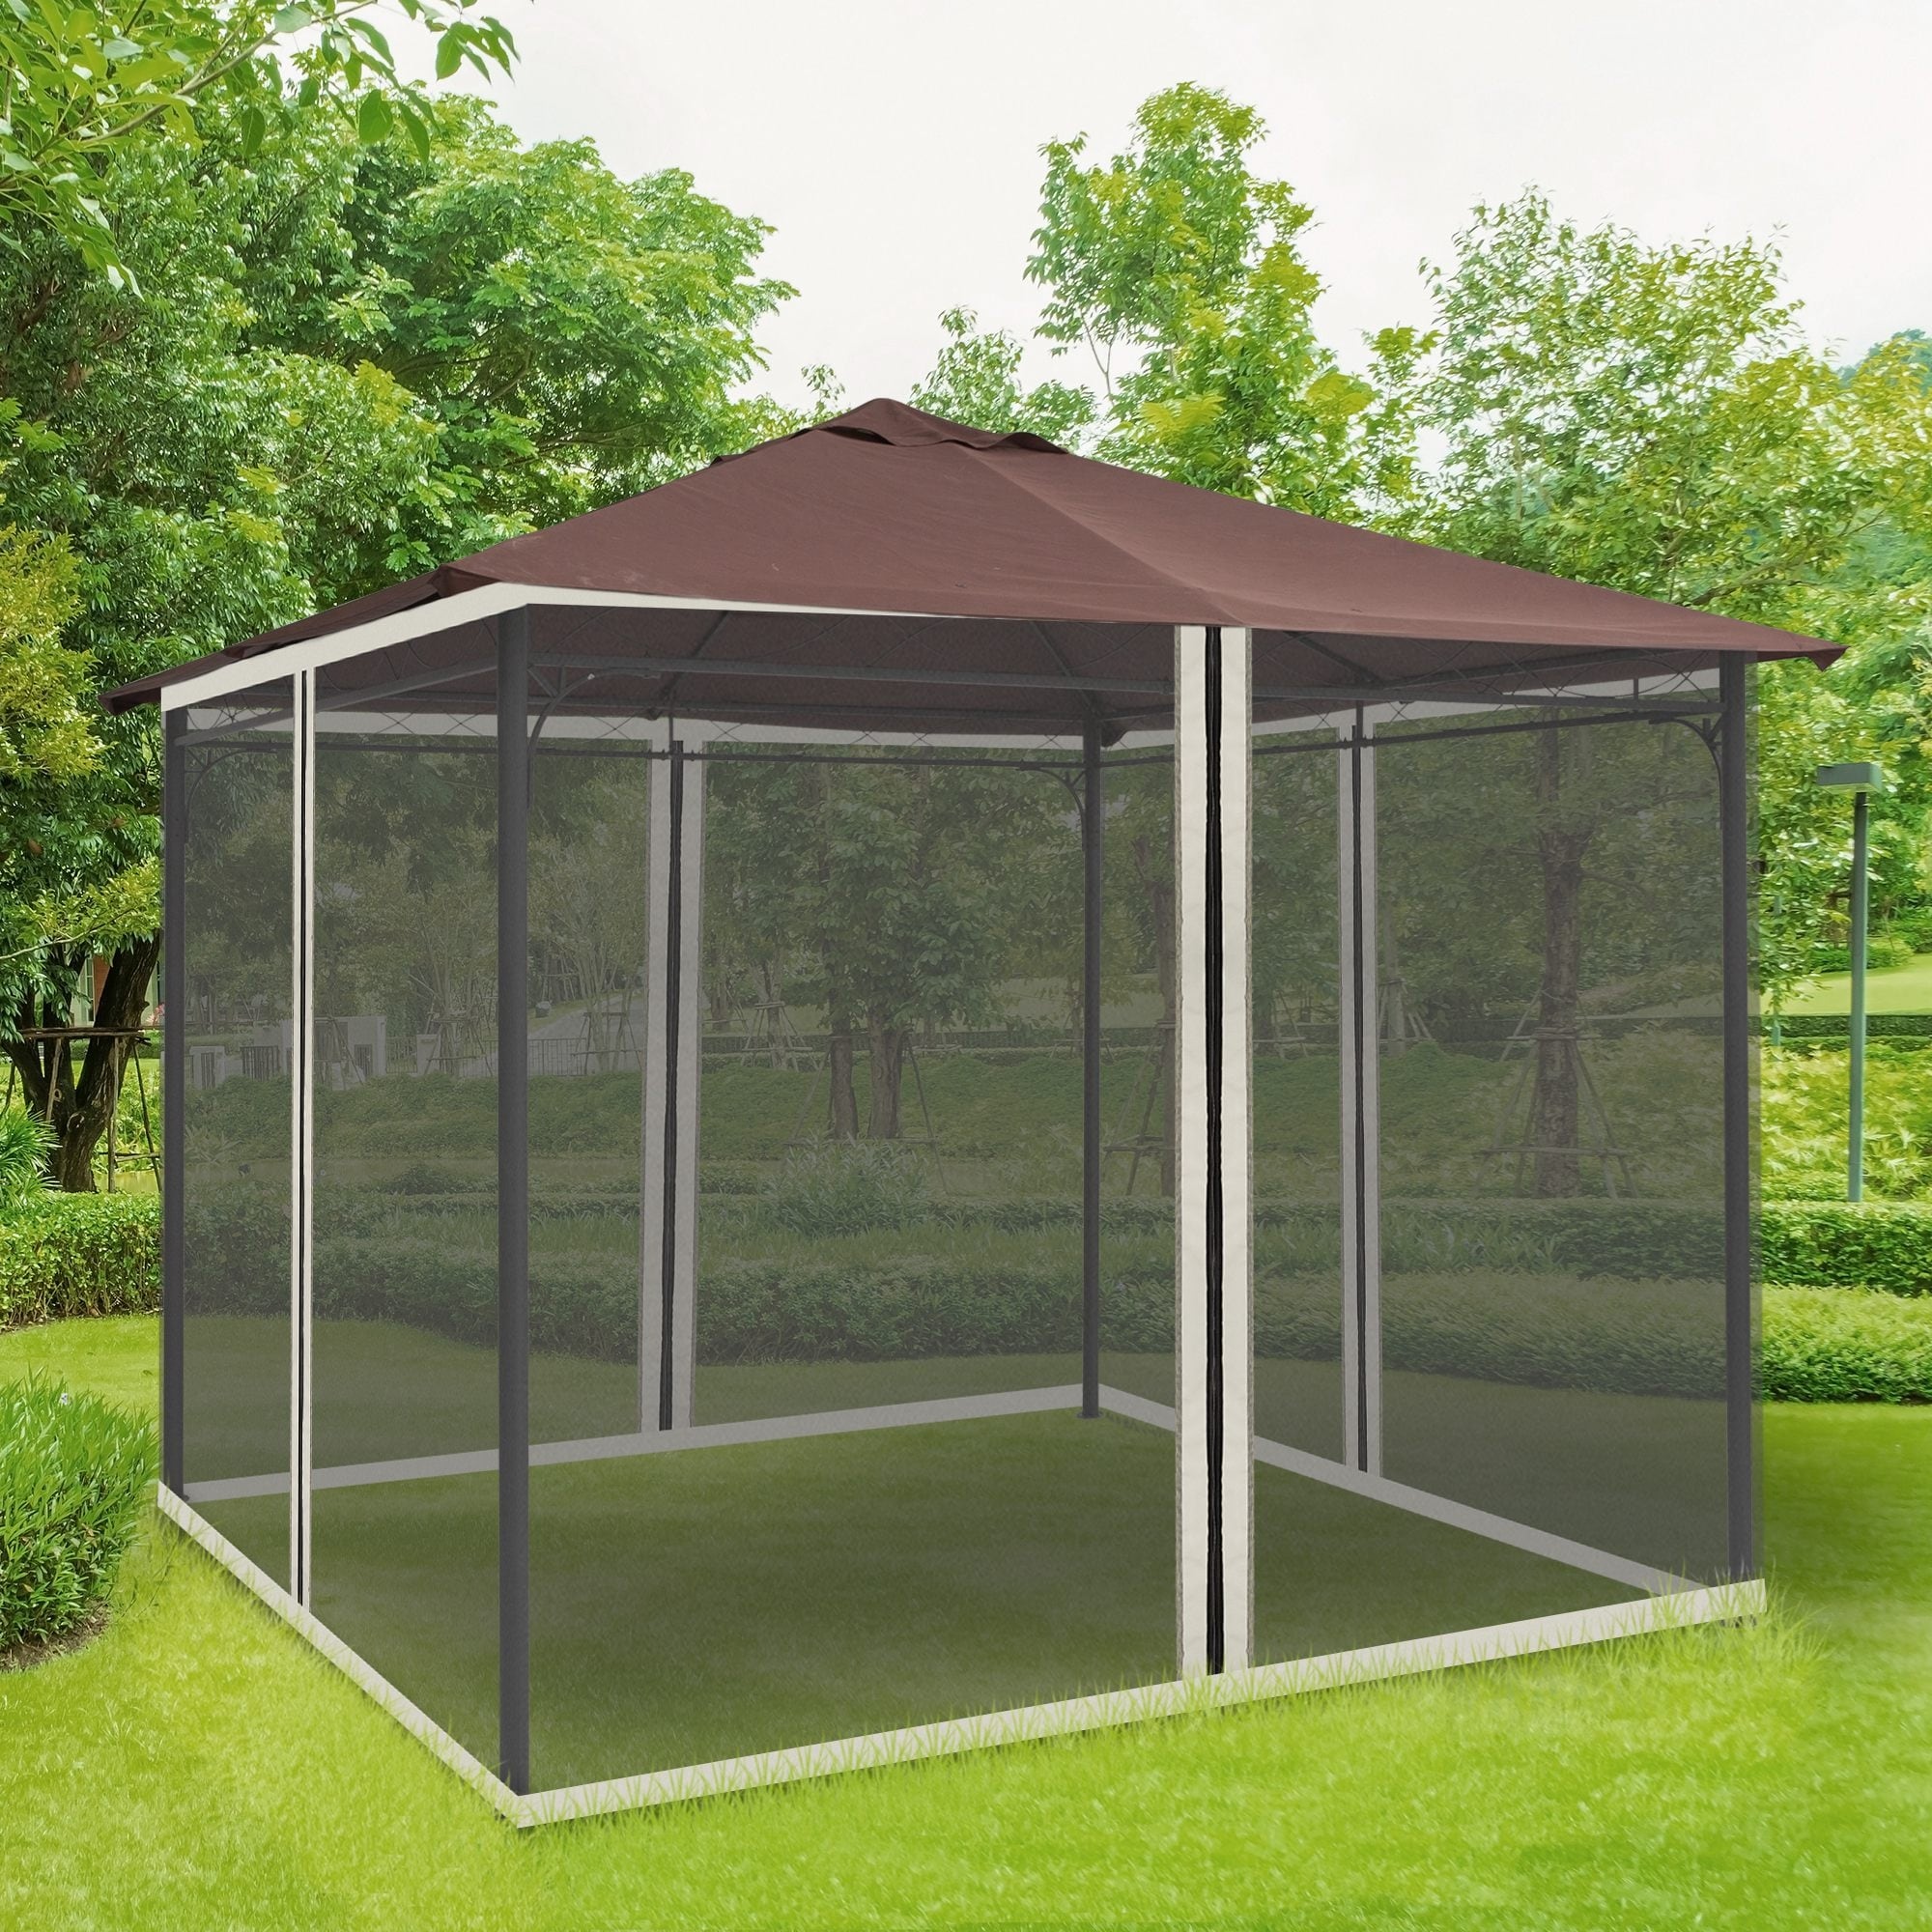 Outdoor Gazebo Canopy 10'x10' Pop Up Party Tent Mesh Mosquito Net Patio Tan NEW 